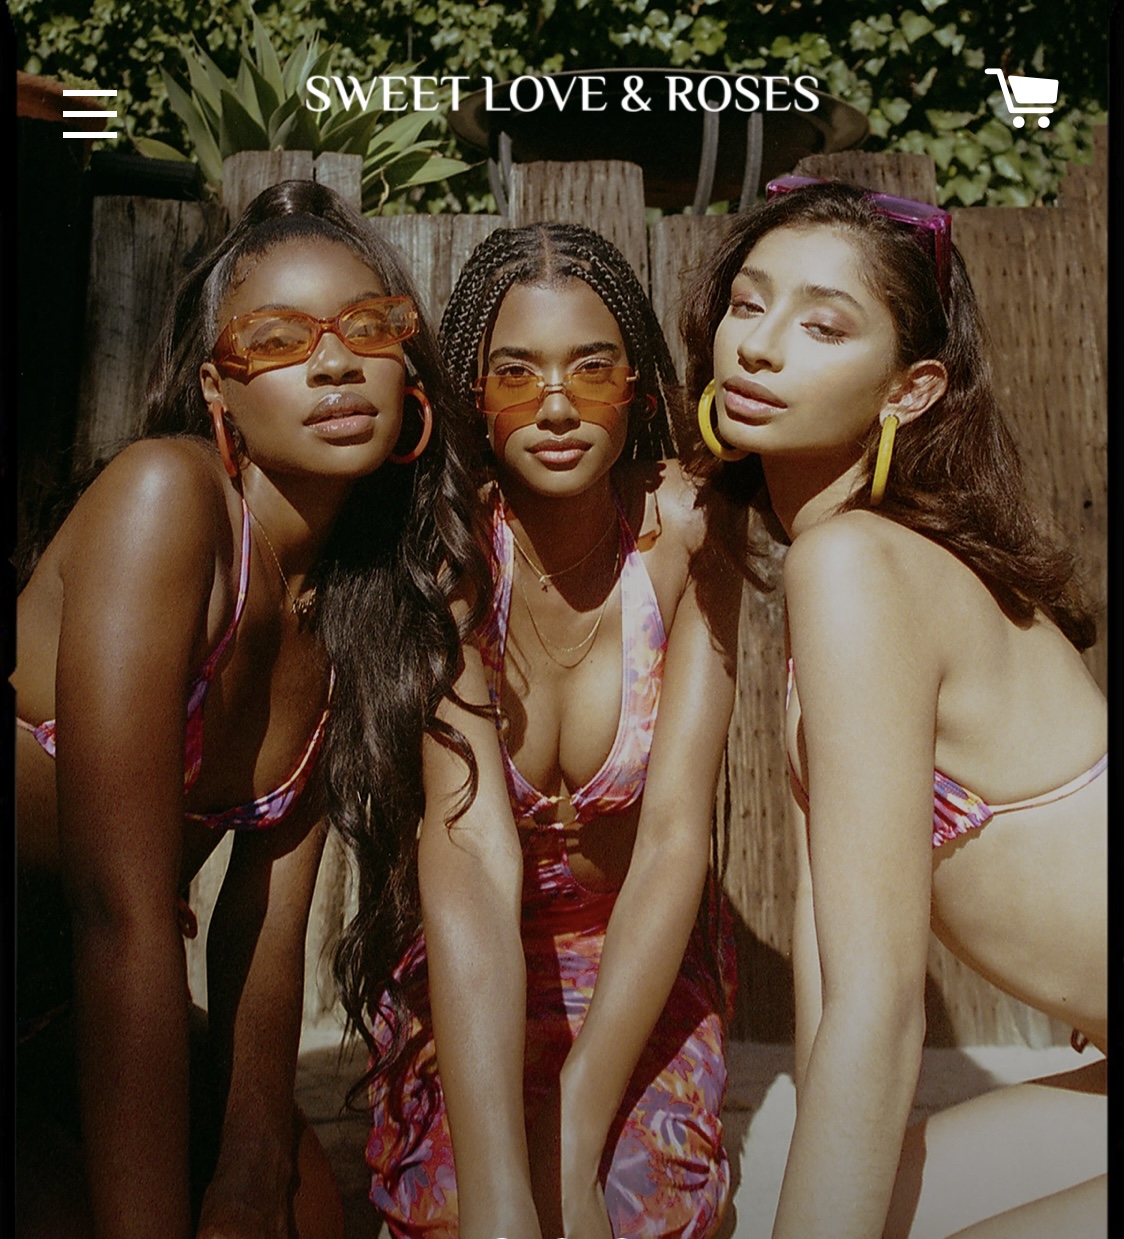 The logo or business face of "Sweet Love and Roses"